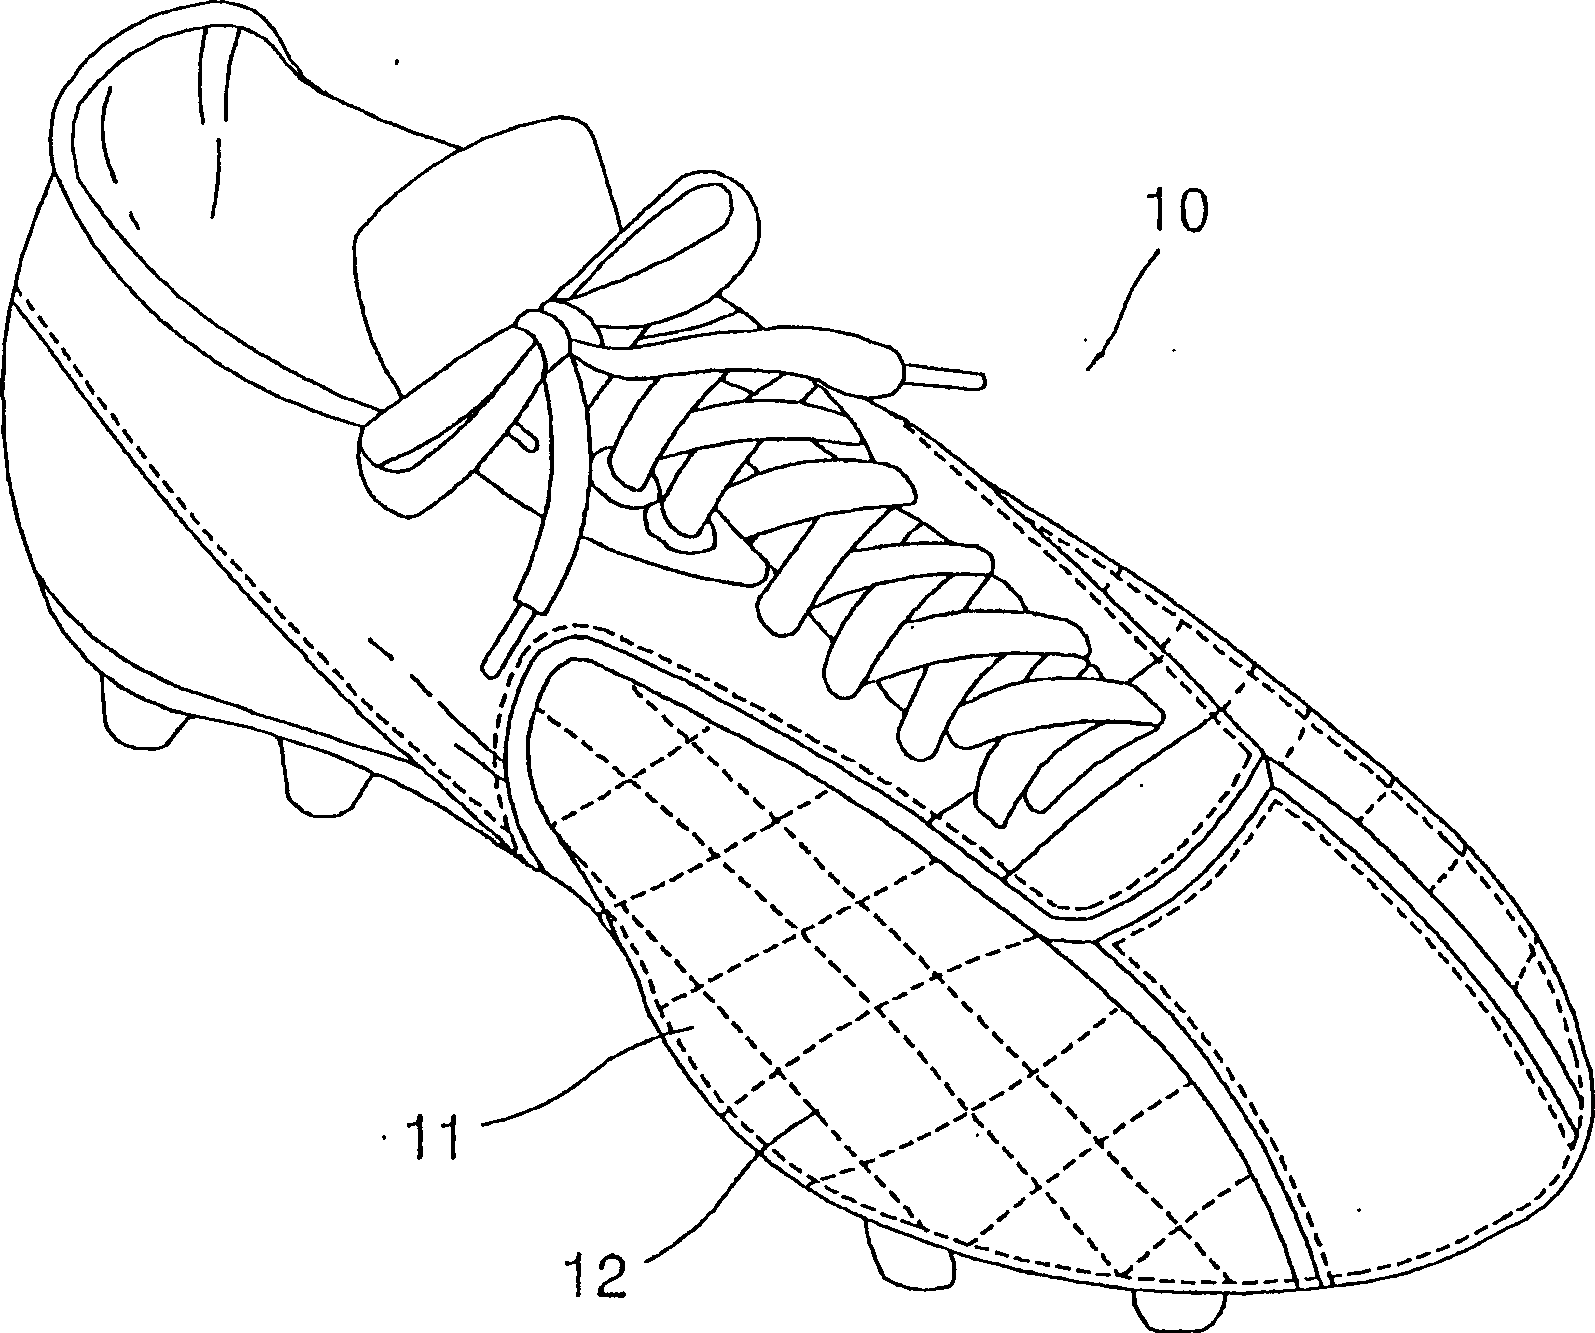 Soccer shoe with improved spinning povver and speed